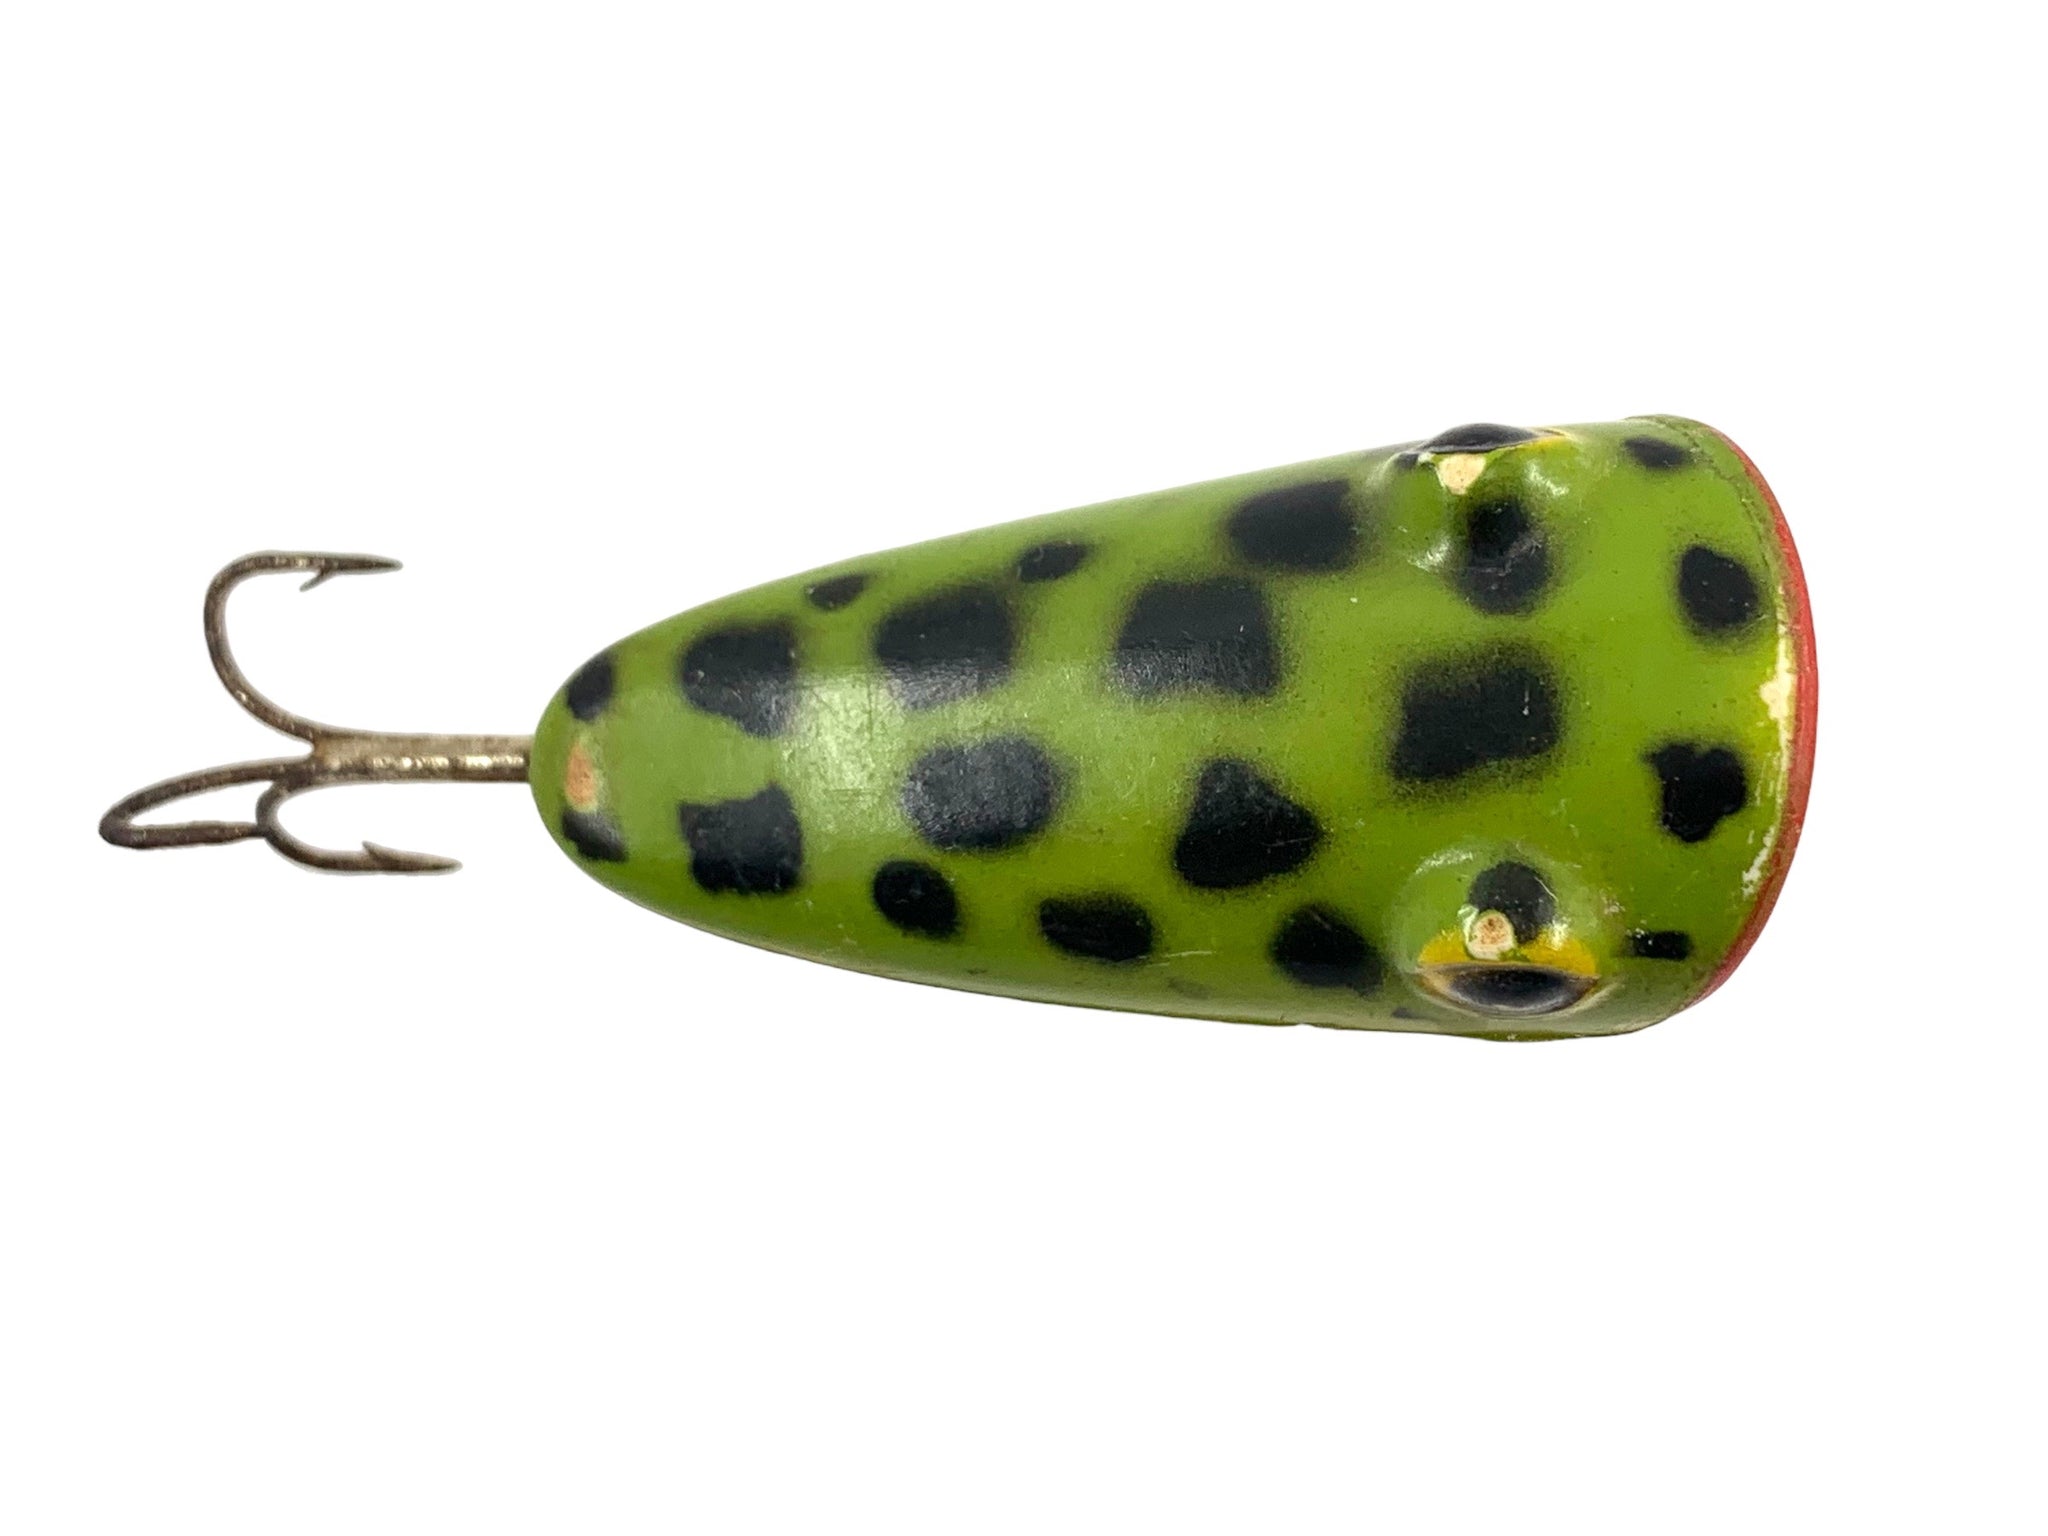 BROOK'S BAITS NO. 5 Topwater Popper Fishing Lure • FROG – Toad Tackle